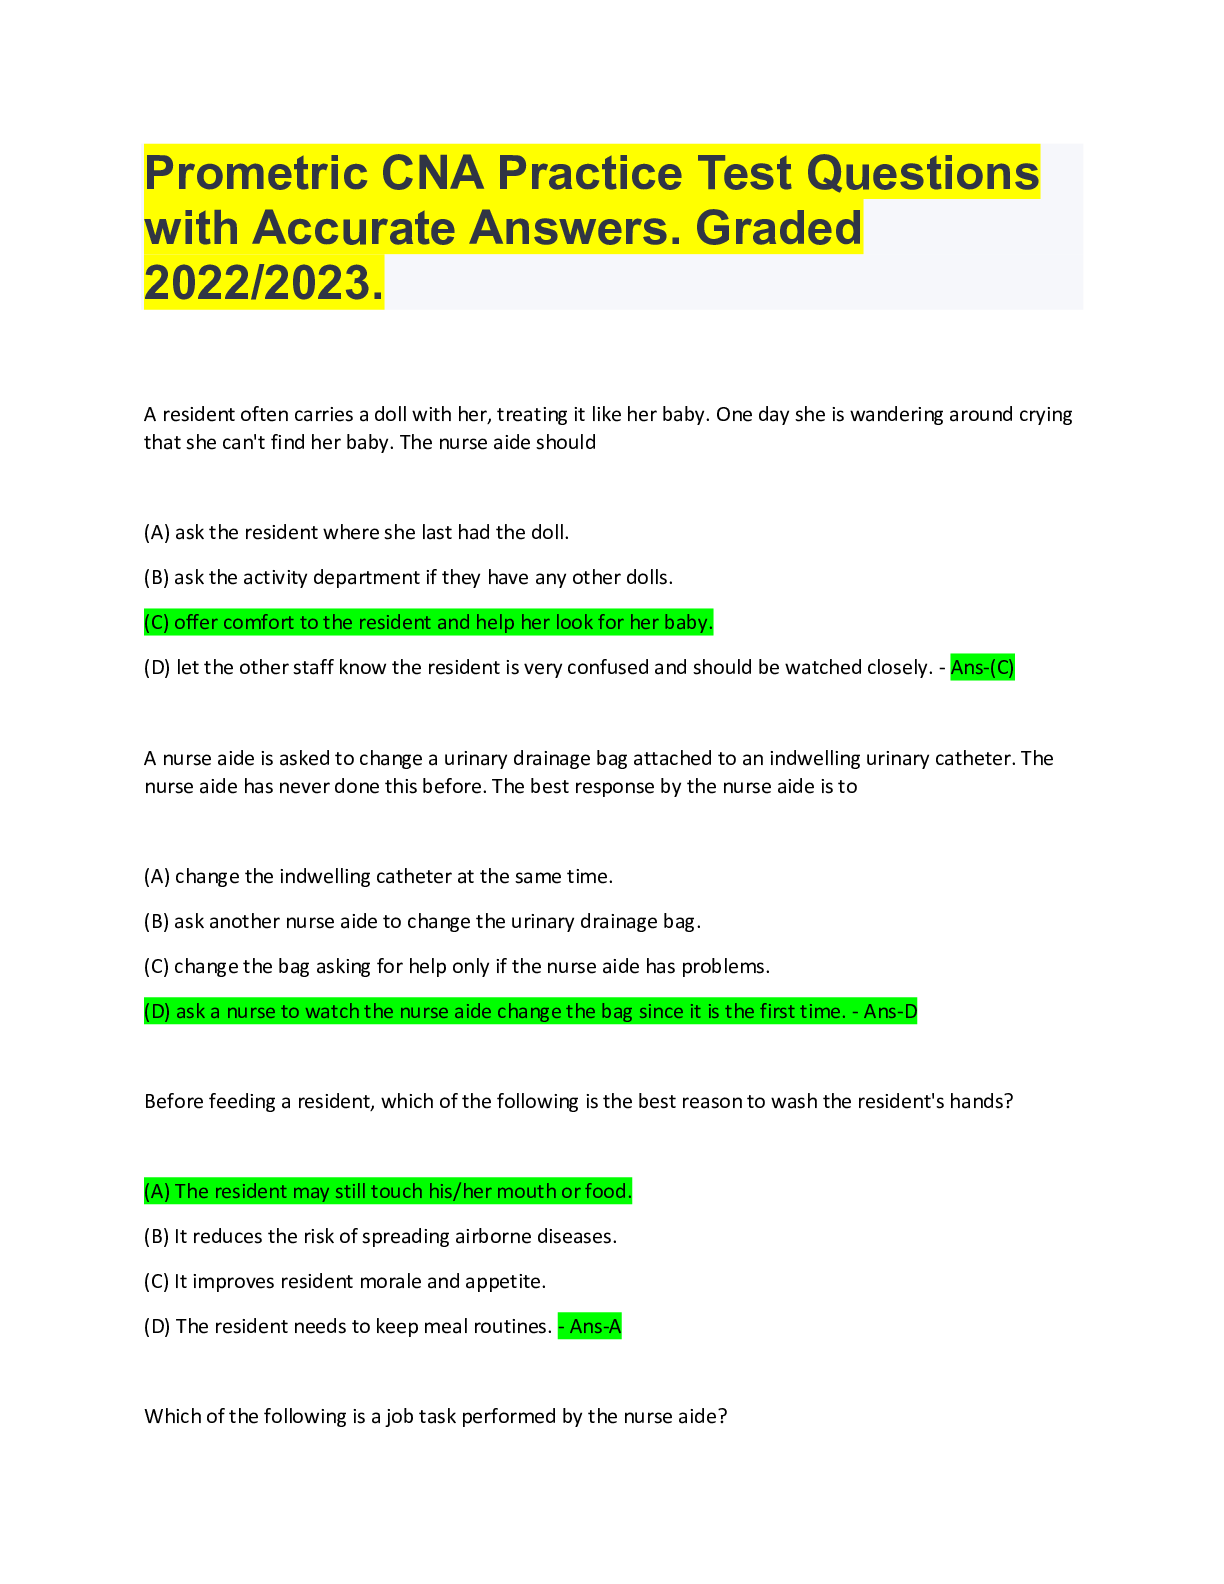 Prometric CNA Practice Test Questions with Accurate Answers. Graded